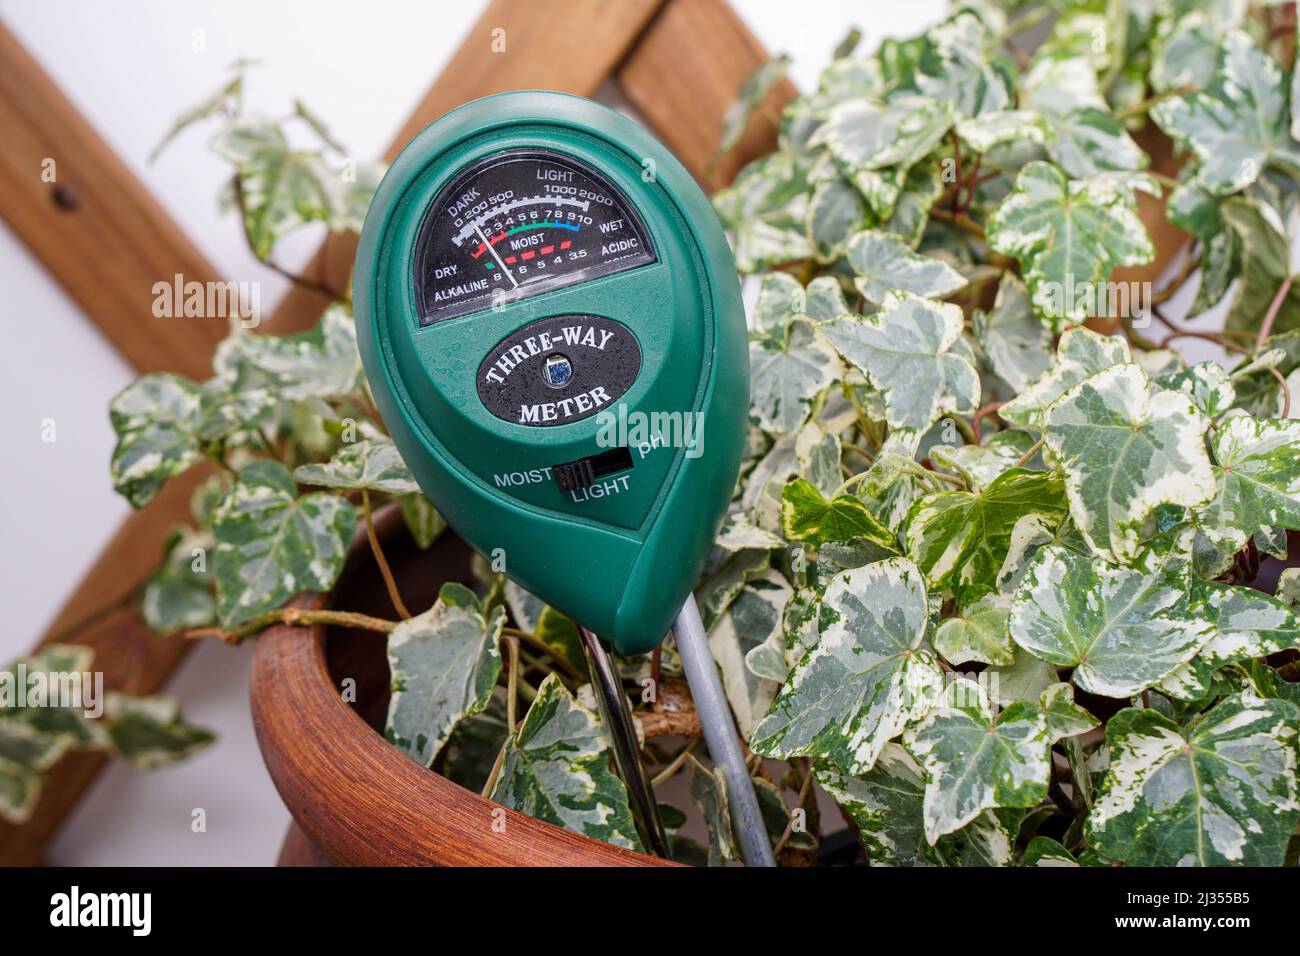 A house plant with a light, moisture and PH meter inserted. Stock Photo